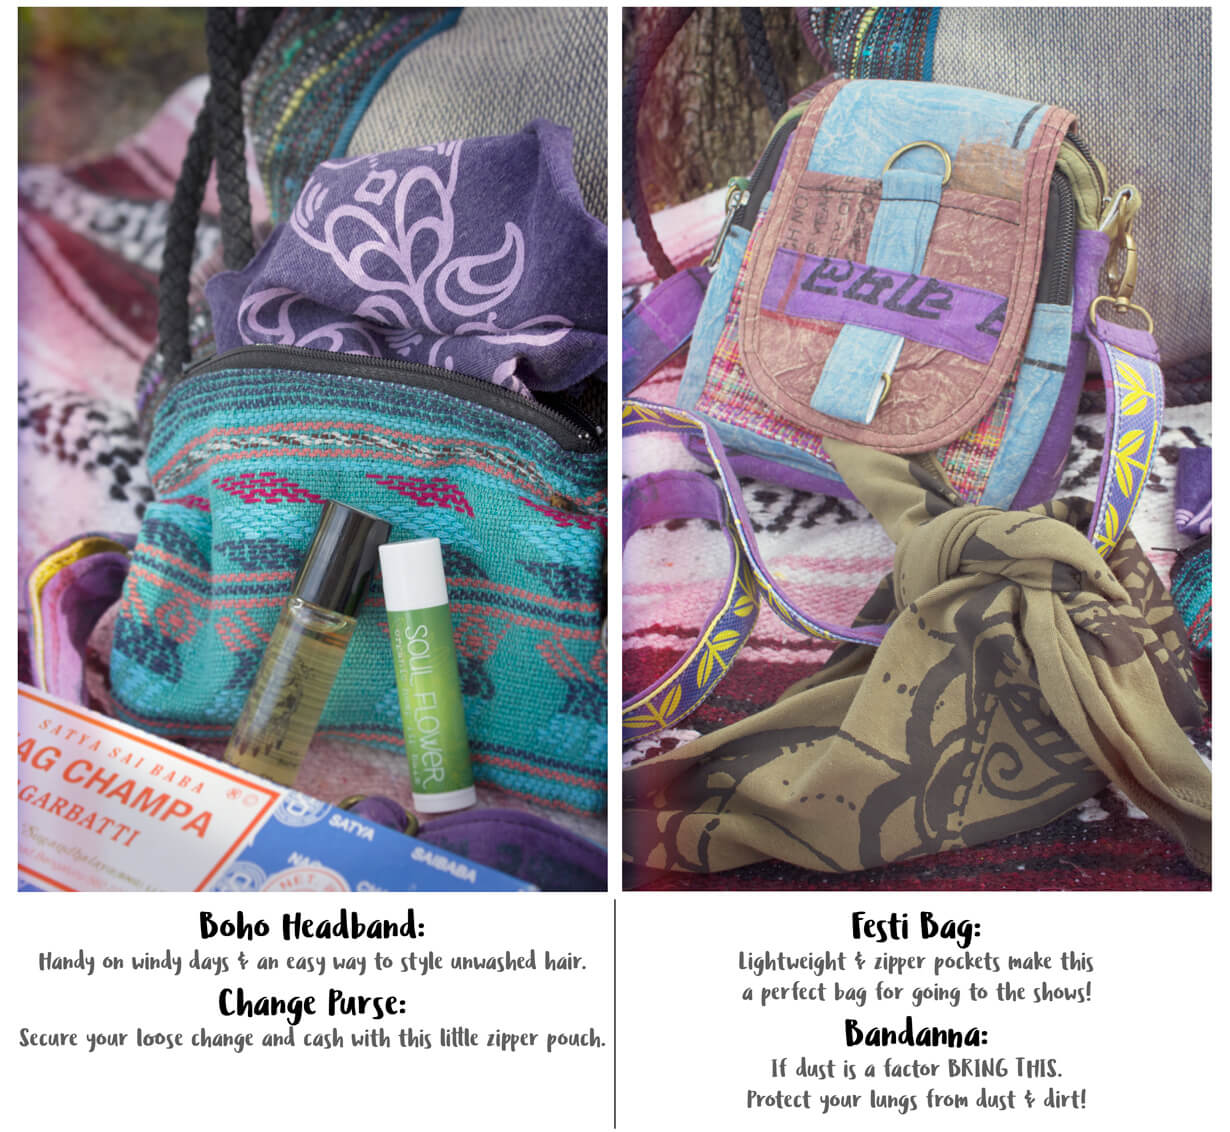 pack your bags2 03 - Pack Your Boho Bags, It's Festi Season!